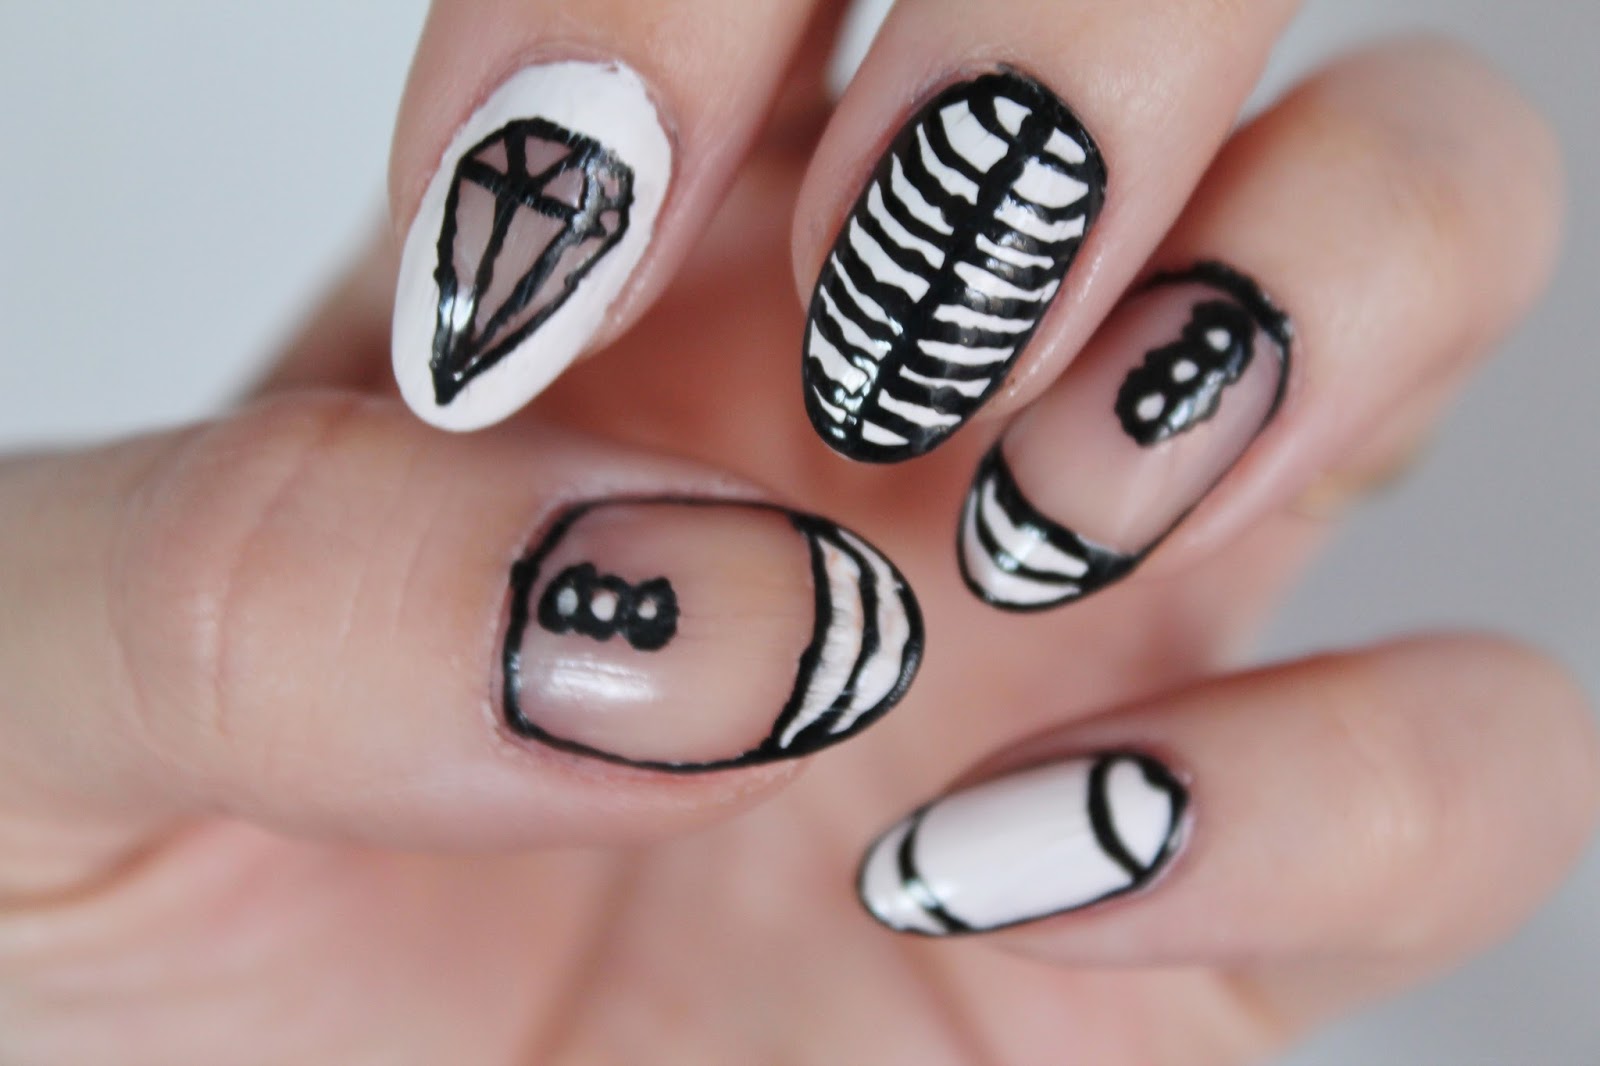 5. DIY Black and White Nail Art Tutorial - wide 6